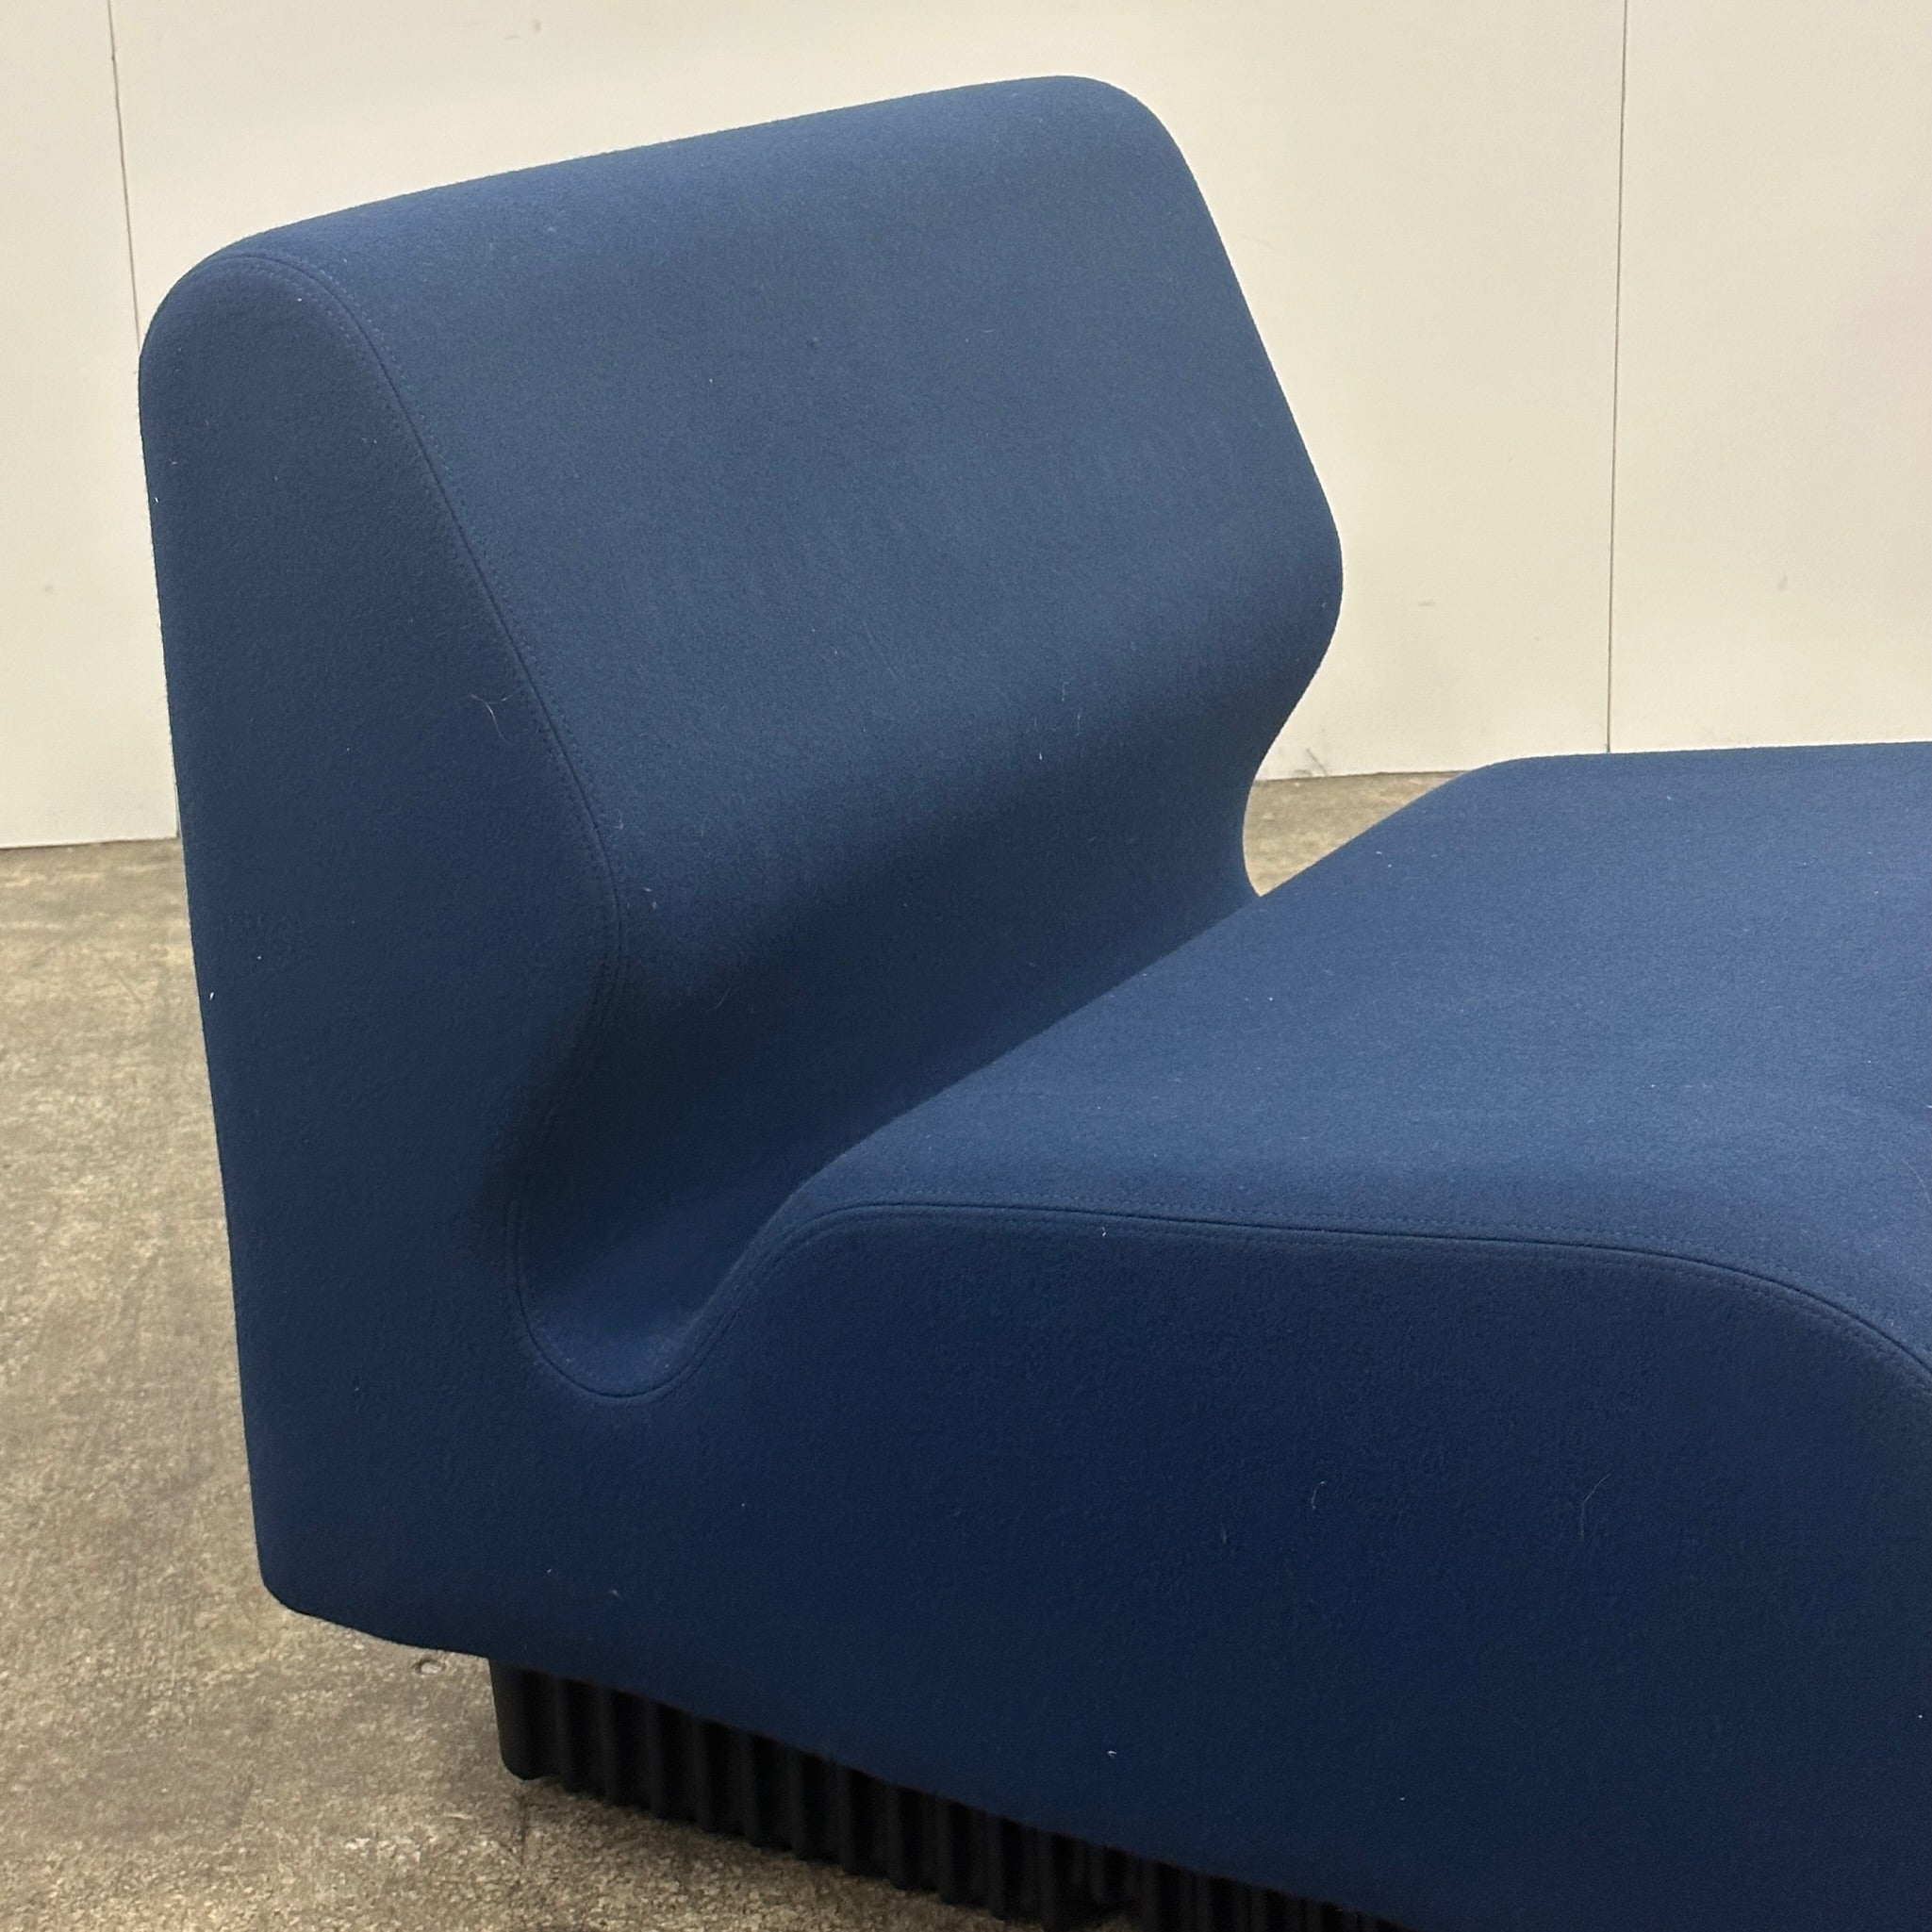 Modular Seating by Don Chadwick for Herman Miller